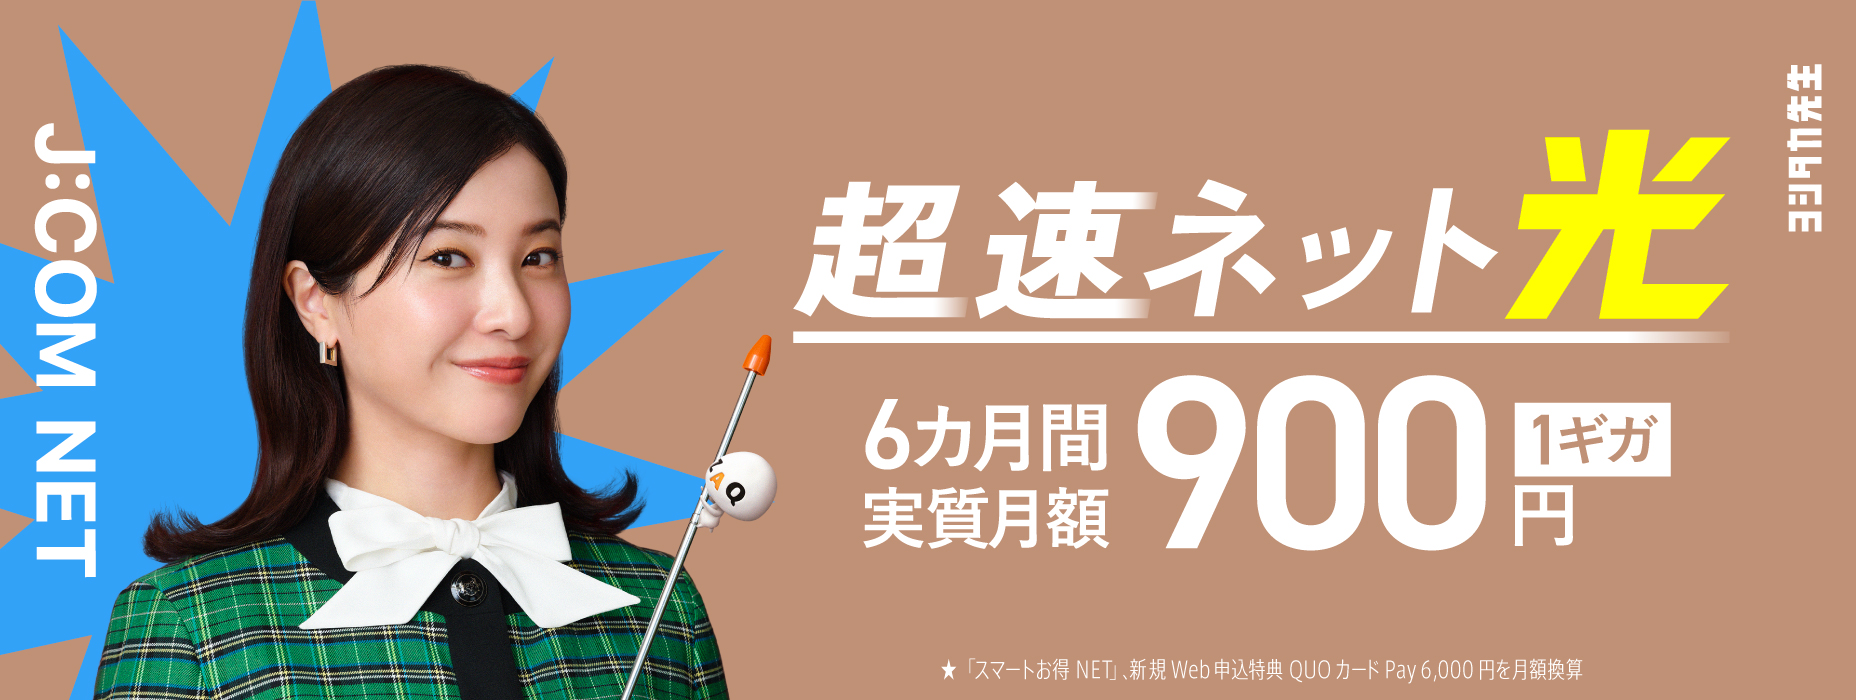 6 months of high-speed internet with next-generation AI Wi-Fi of 900 yen (tax included) a month~ ★ “Smart OTOKU NET”, sign-up online for the new benefit QUO Card Pay and get up to 6,000 yen per month